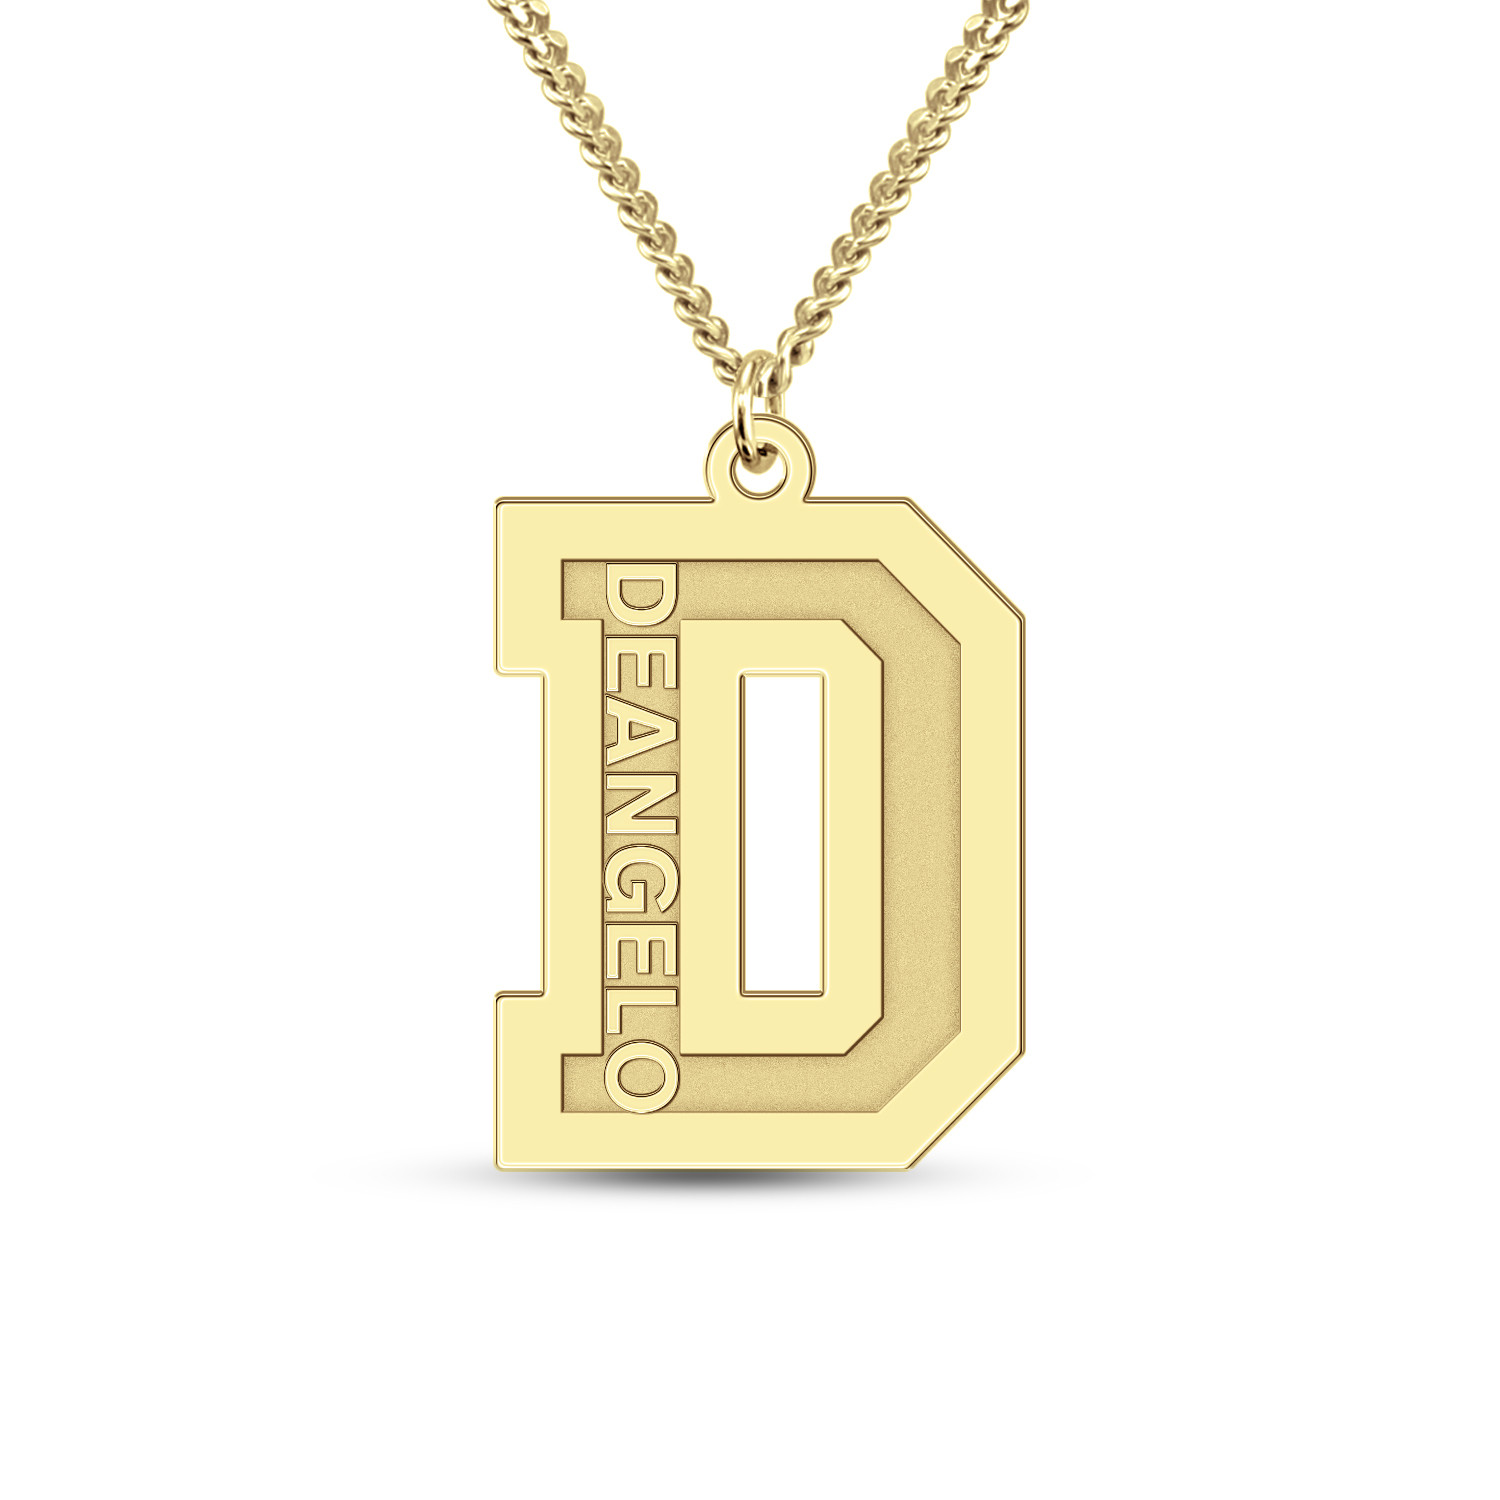 Engravable Initial Lock Necklace (1 Initial) - 19